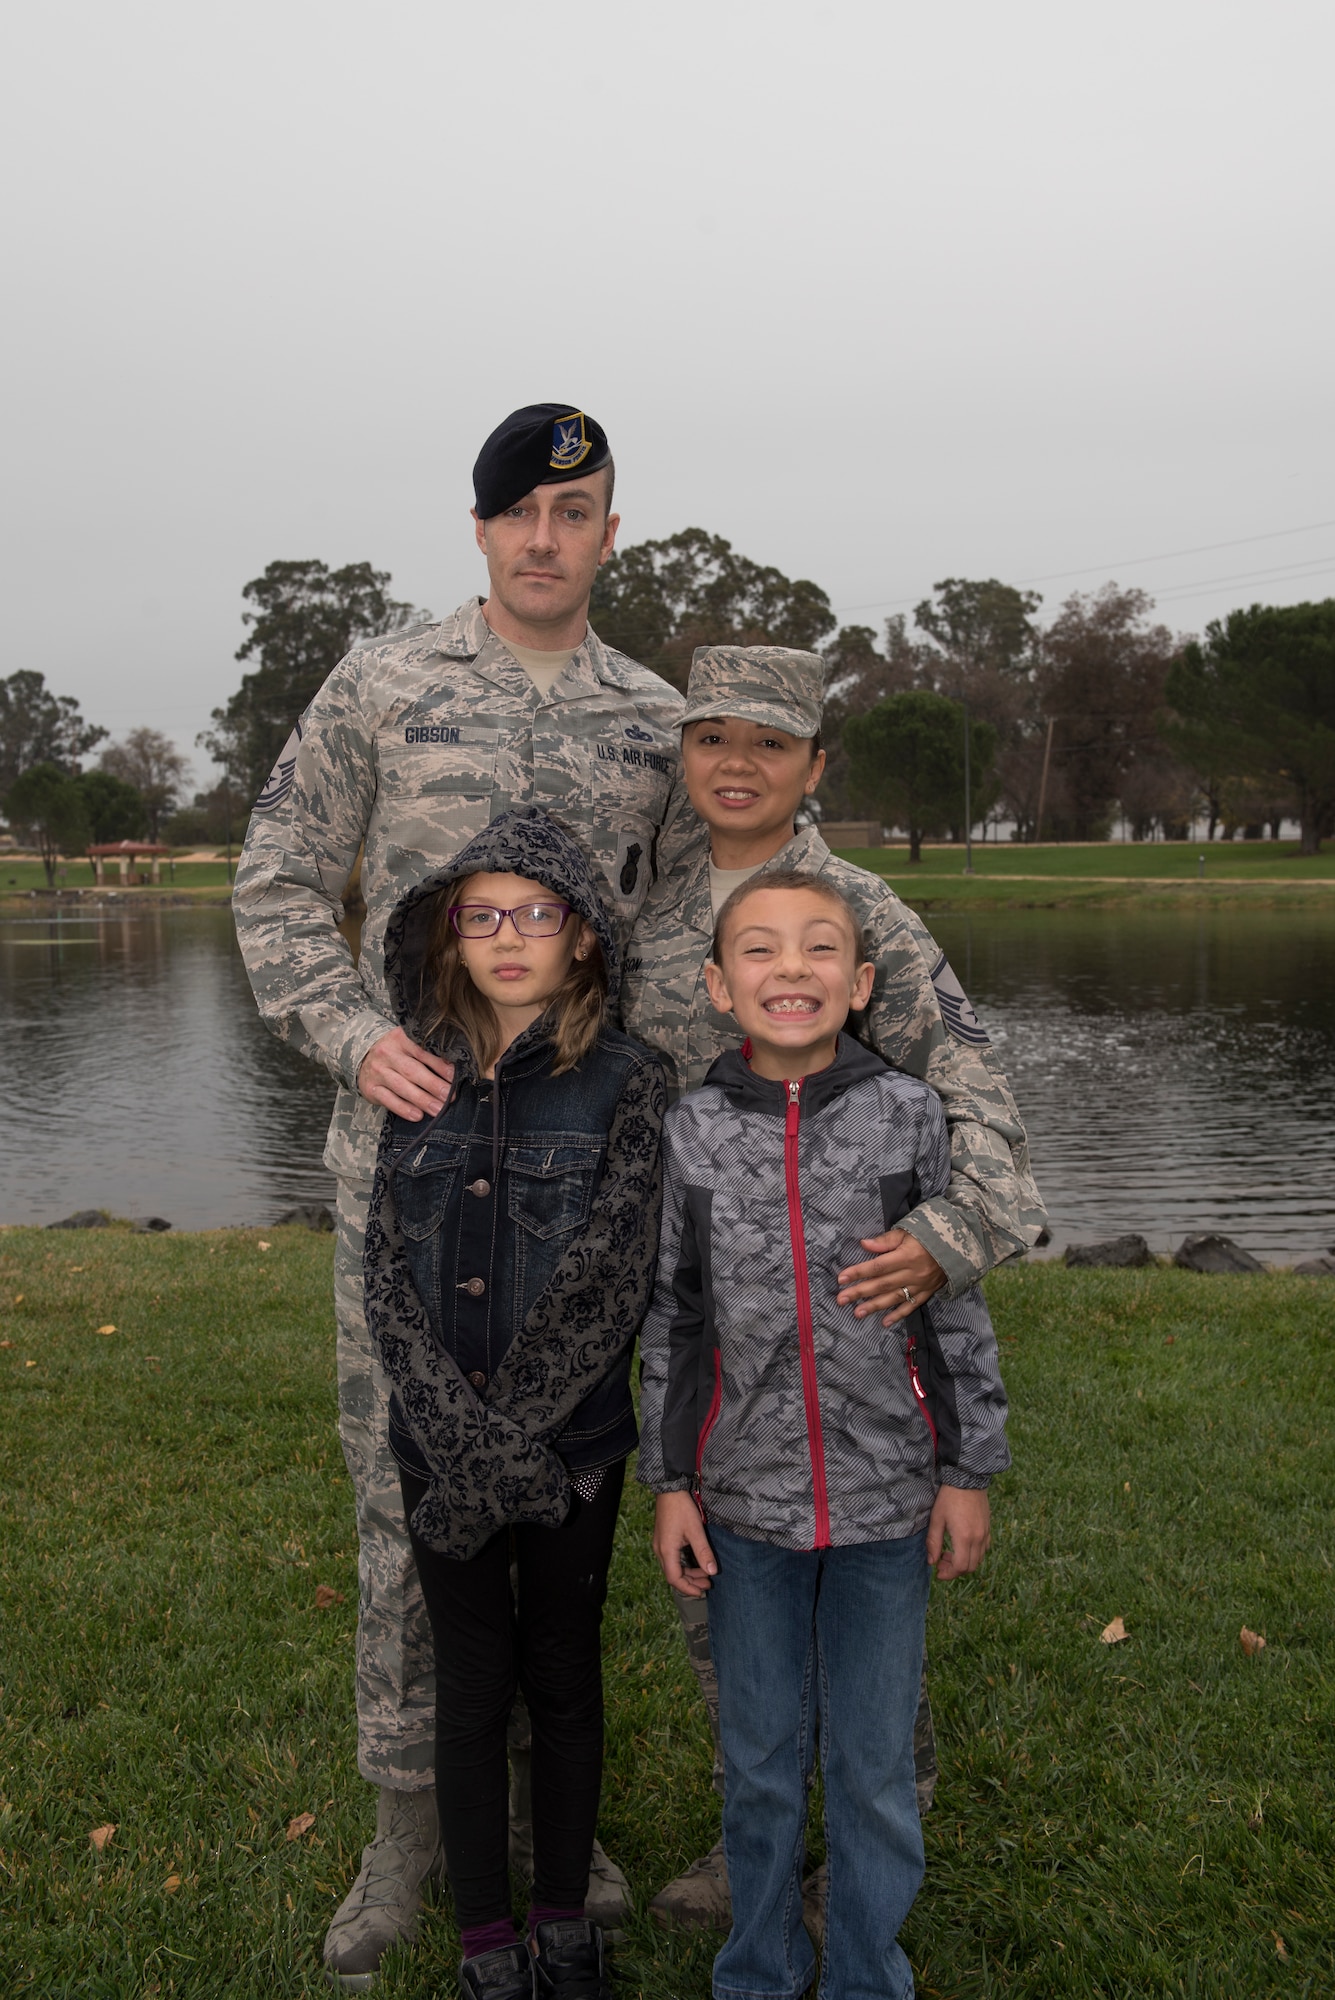 U.S. Air Force Master Sgt. Mike Gibson, left, 60th Security Forces Squadron NCO in charge of operations, and his wife, Master Sgt. Angela Gibson, 60th Surgical Operations Squadron flight chief of anesthesia, pose with their children, Taylor and Carter at Travis Air Force Base, Calif., Nov. 27, 2018. The Gibsons have been a dual military couple for more than a decade. (U.S. Air Force photo by Tech. Sgt. James Hodgman)